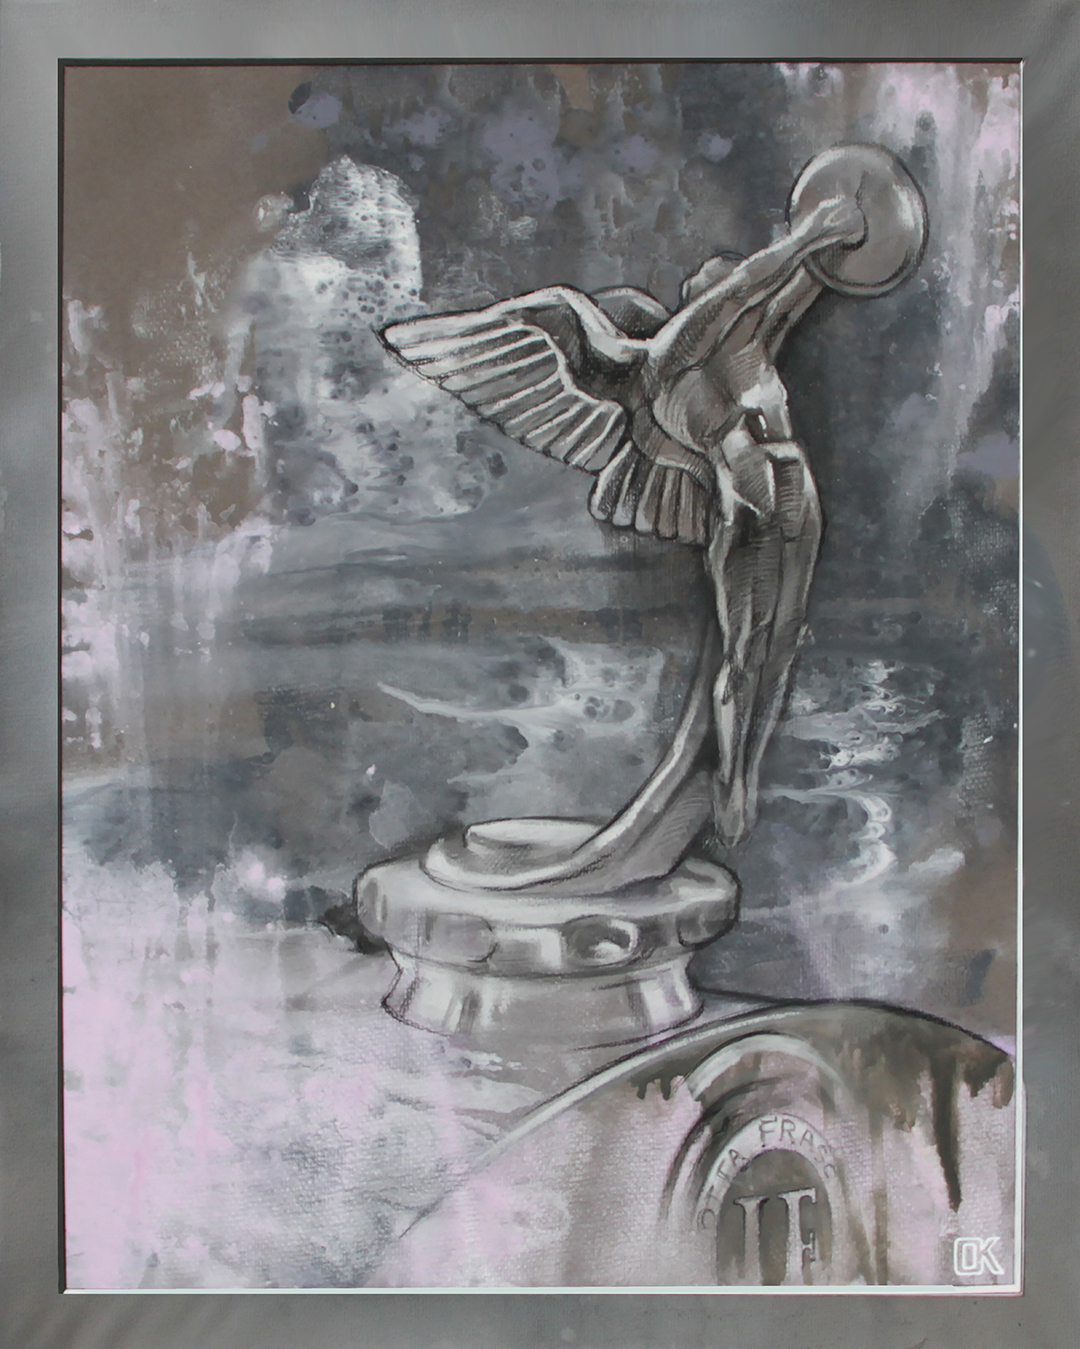 Painting Original Created: 2021 * Size: 15.7 W (40cm) x 19.7 H (50cm) x 0.1 D in * Mediums: Acrylic * Materials: Paper *